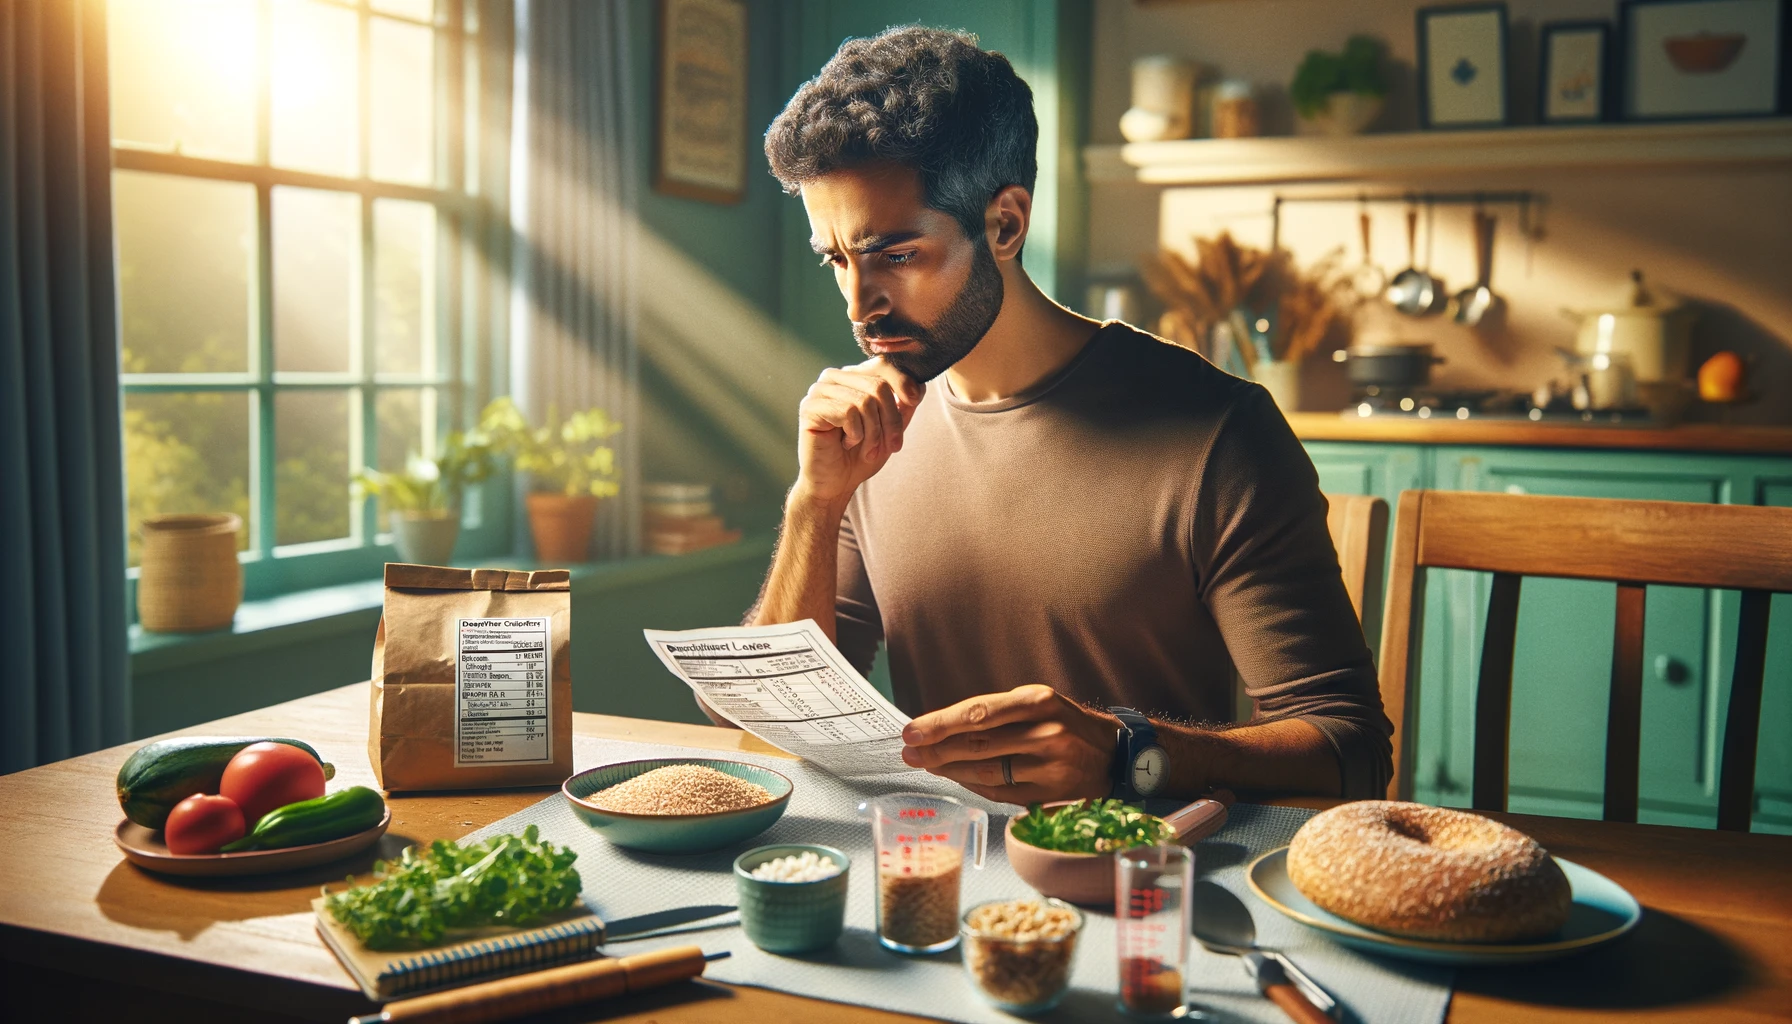 A Middle-Eastern individual with diabetes seated at a dining table, examining a nutritional label, with a balanced meal and carb counts notebook on the table in a sunlit kitchen setting.